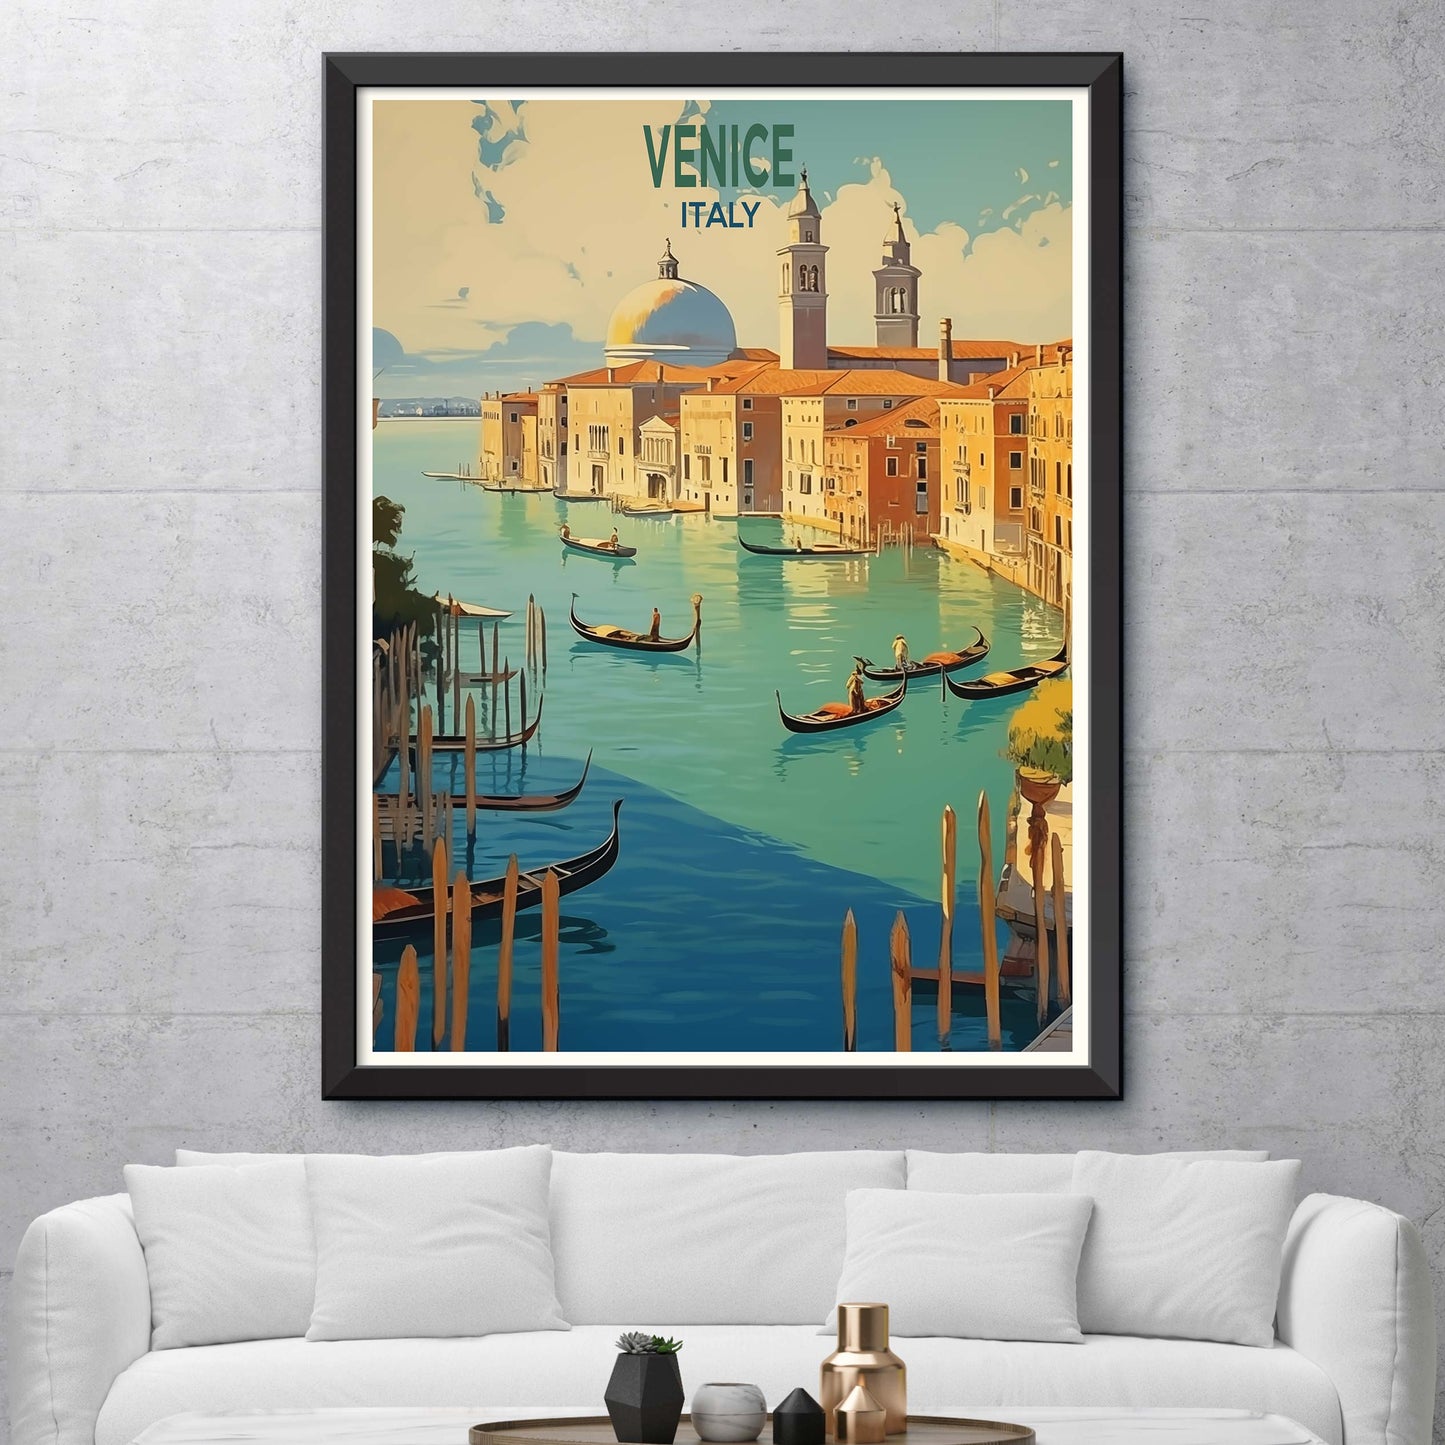 Venice, Italy City of Canals and Romance